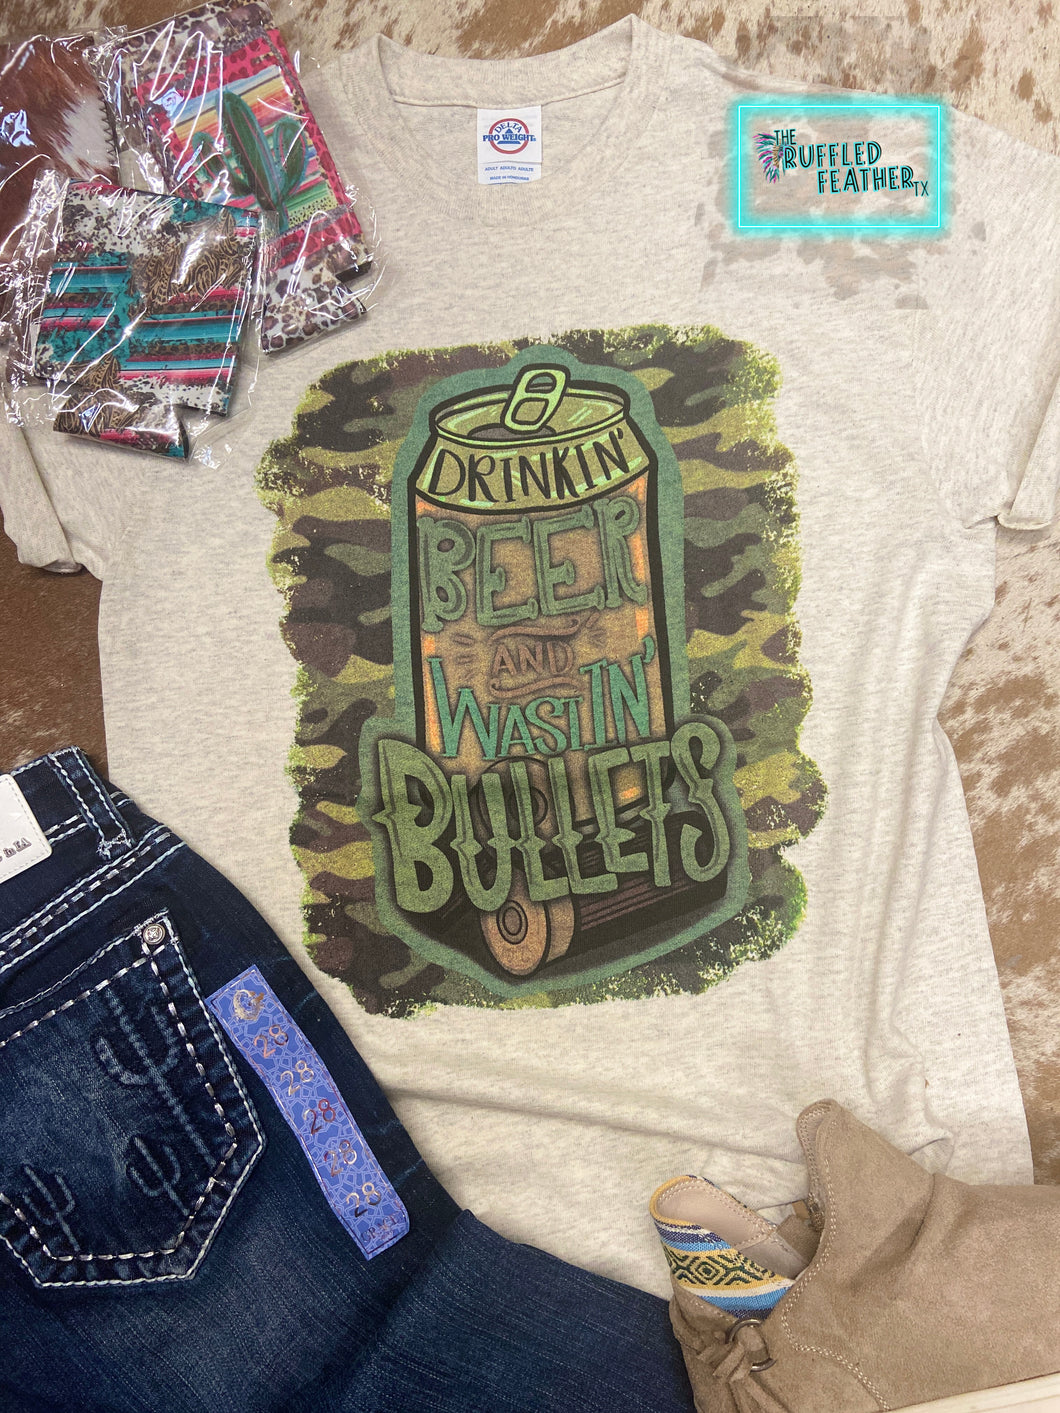 Drinking Beer And Wastin’ Bullets Graphic Tee